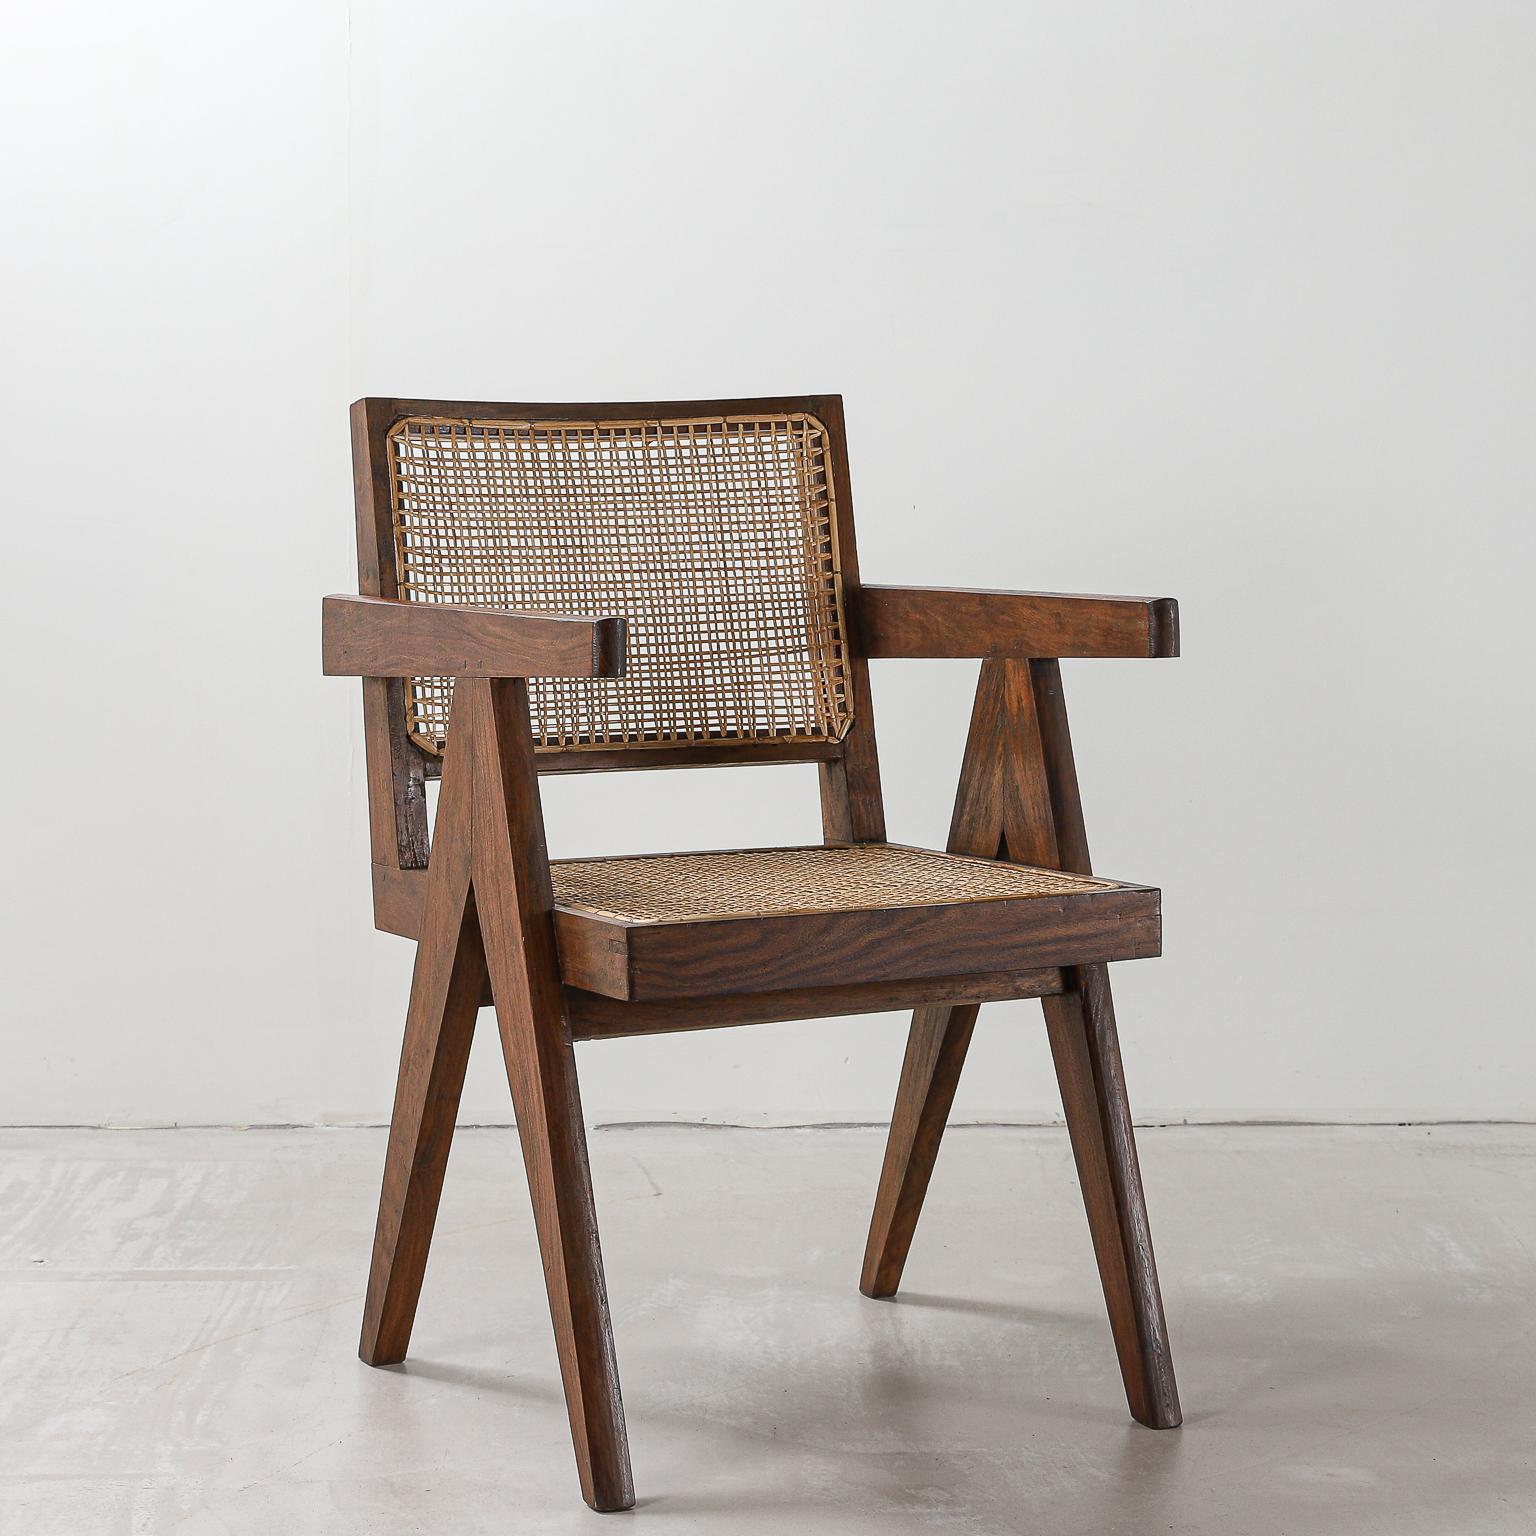 Pierre Jeanneret office chair, Variant, circa 1953-1954. Model number PJ-SI-28-D

Teak and rattan. Intended for: various administrative buildings, Chandigarh, India.

Photos of original state to show authenticity available on request. 

Pierre